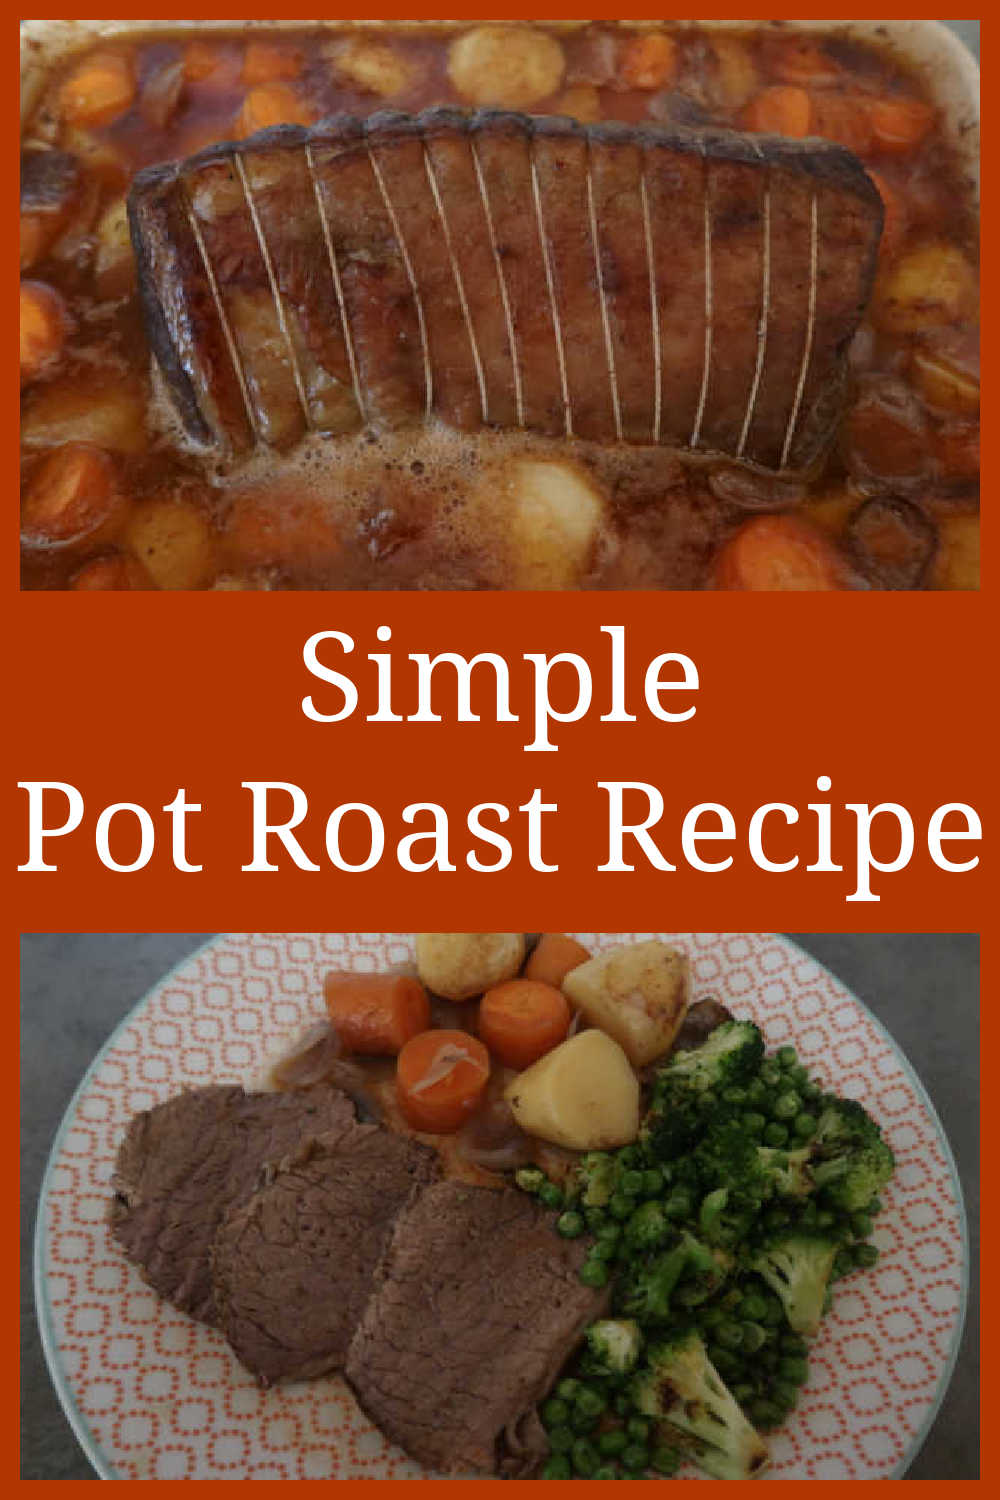 Simple Pot Roast Recipe - How to make the best ever easy pot roasted beef in the oven that's the perfect classic comfort food meal - with the video tutorial.